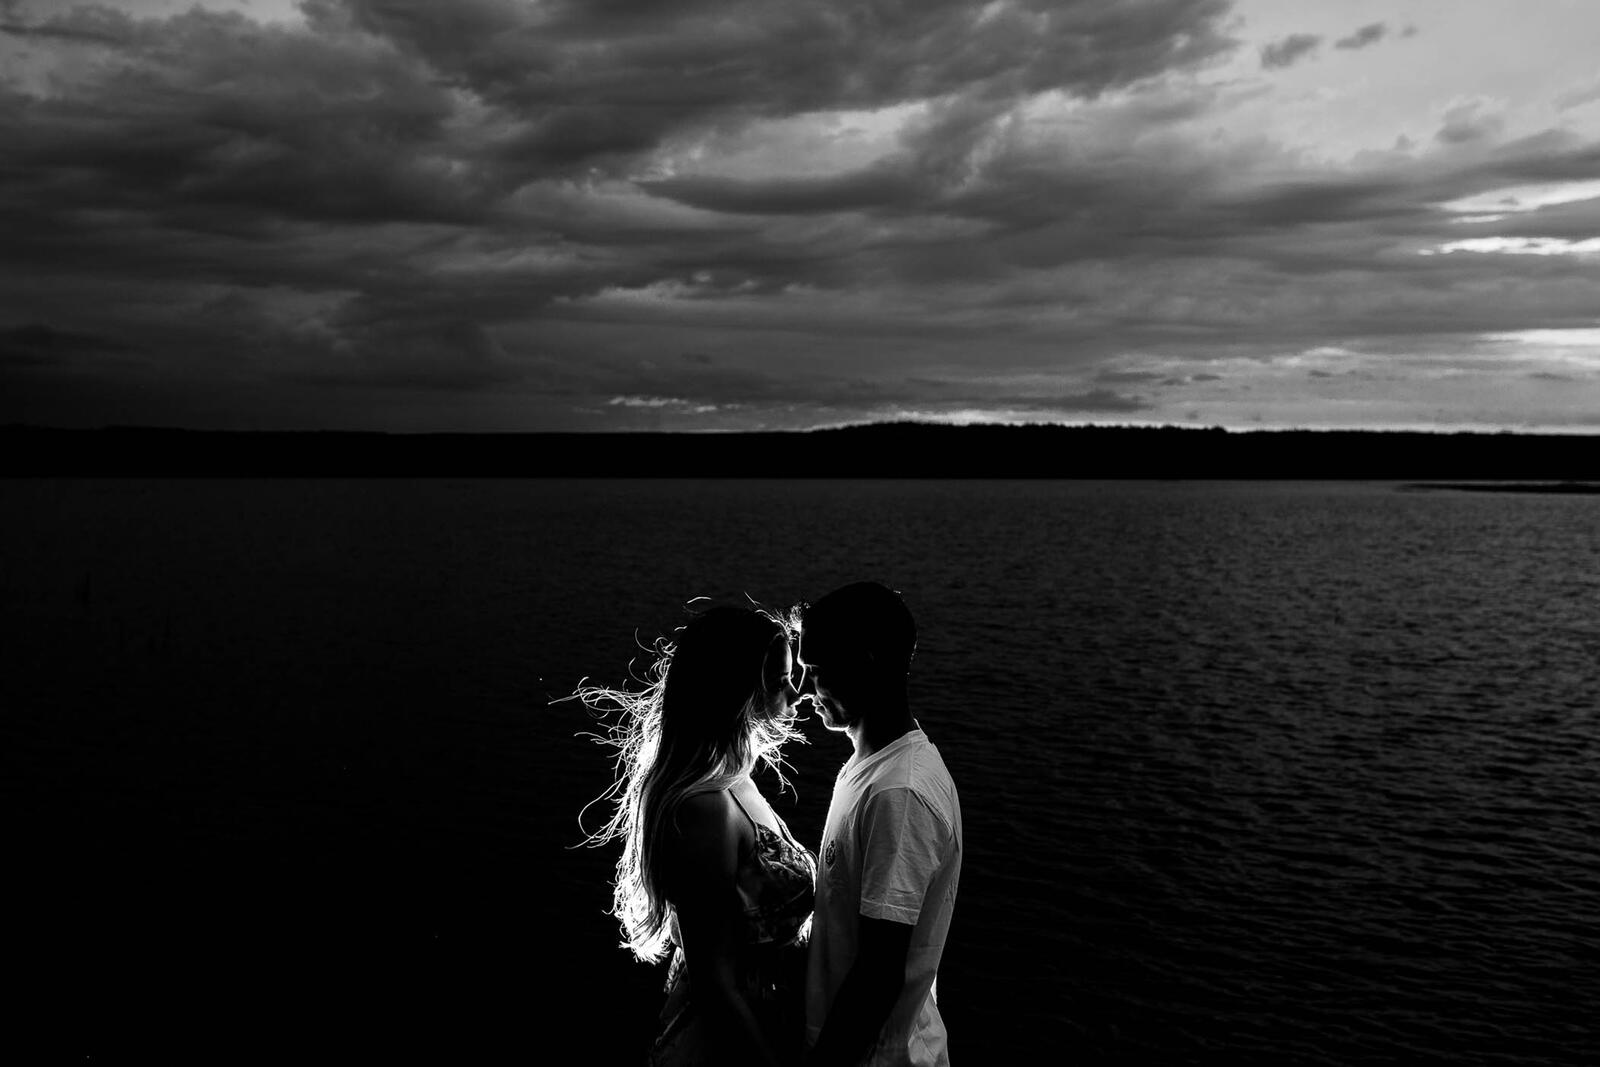 Free photo A couple in love embracing on the lake shore in the dark